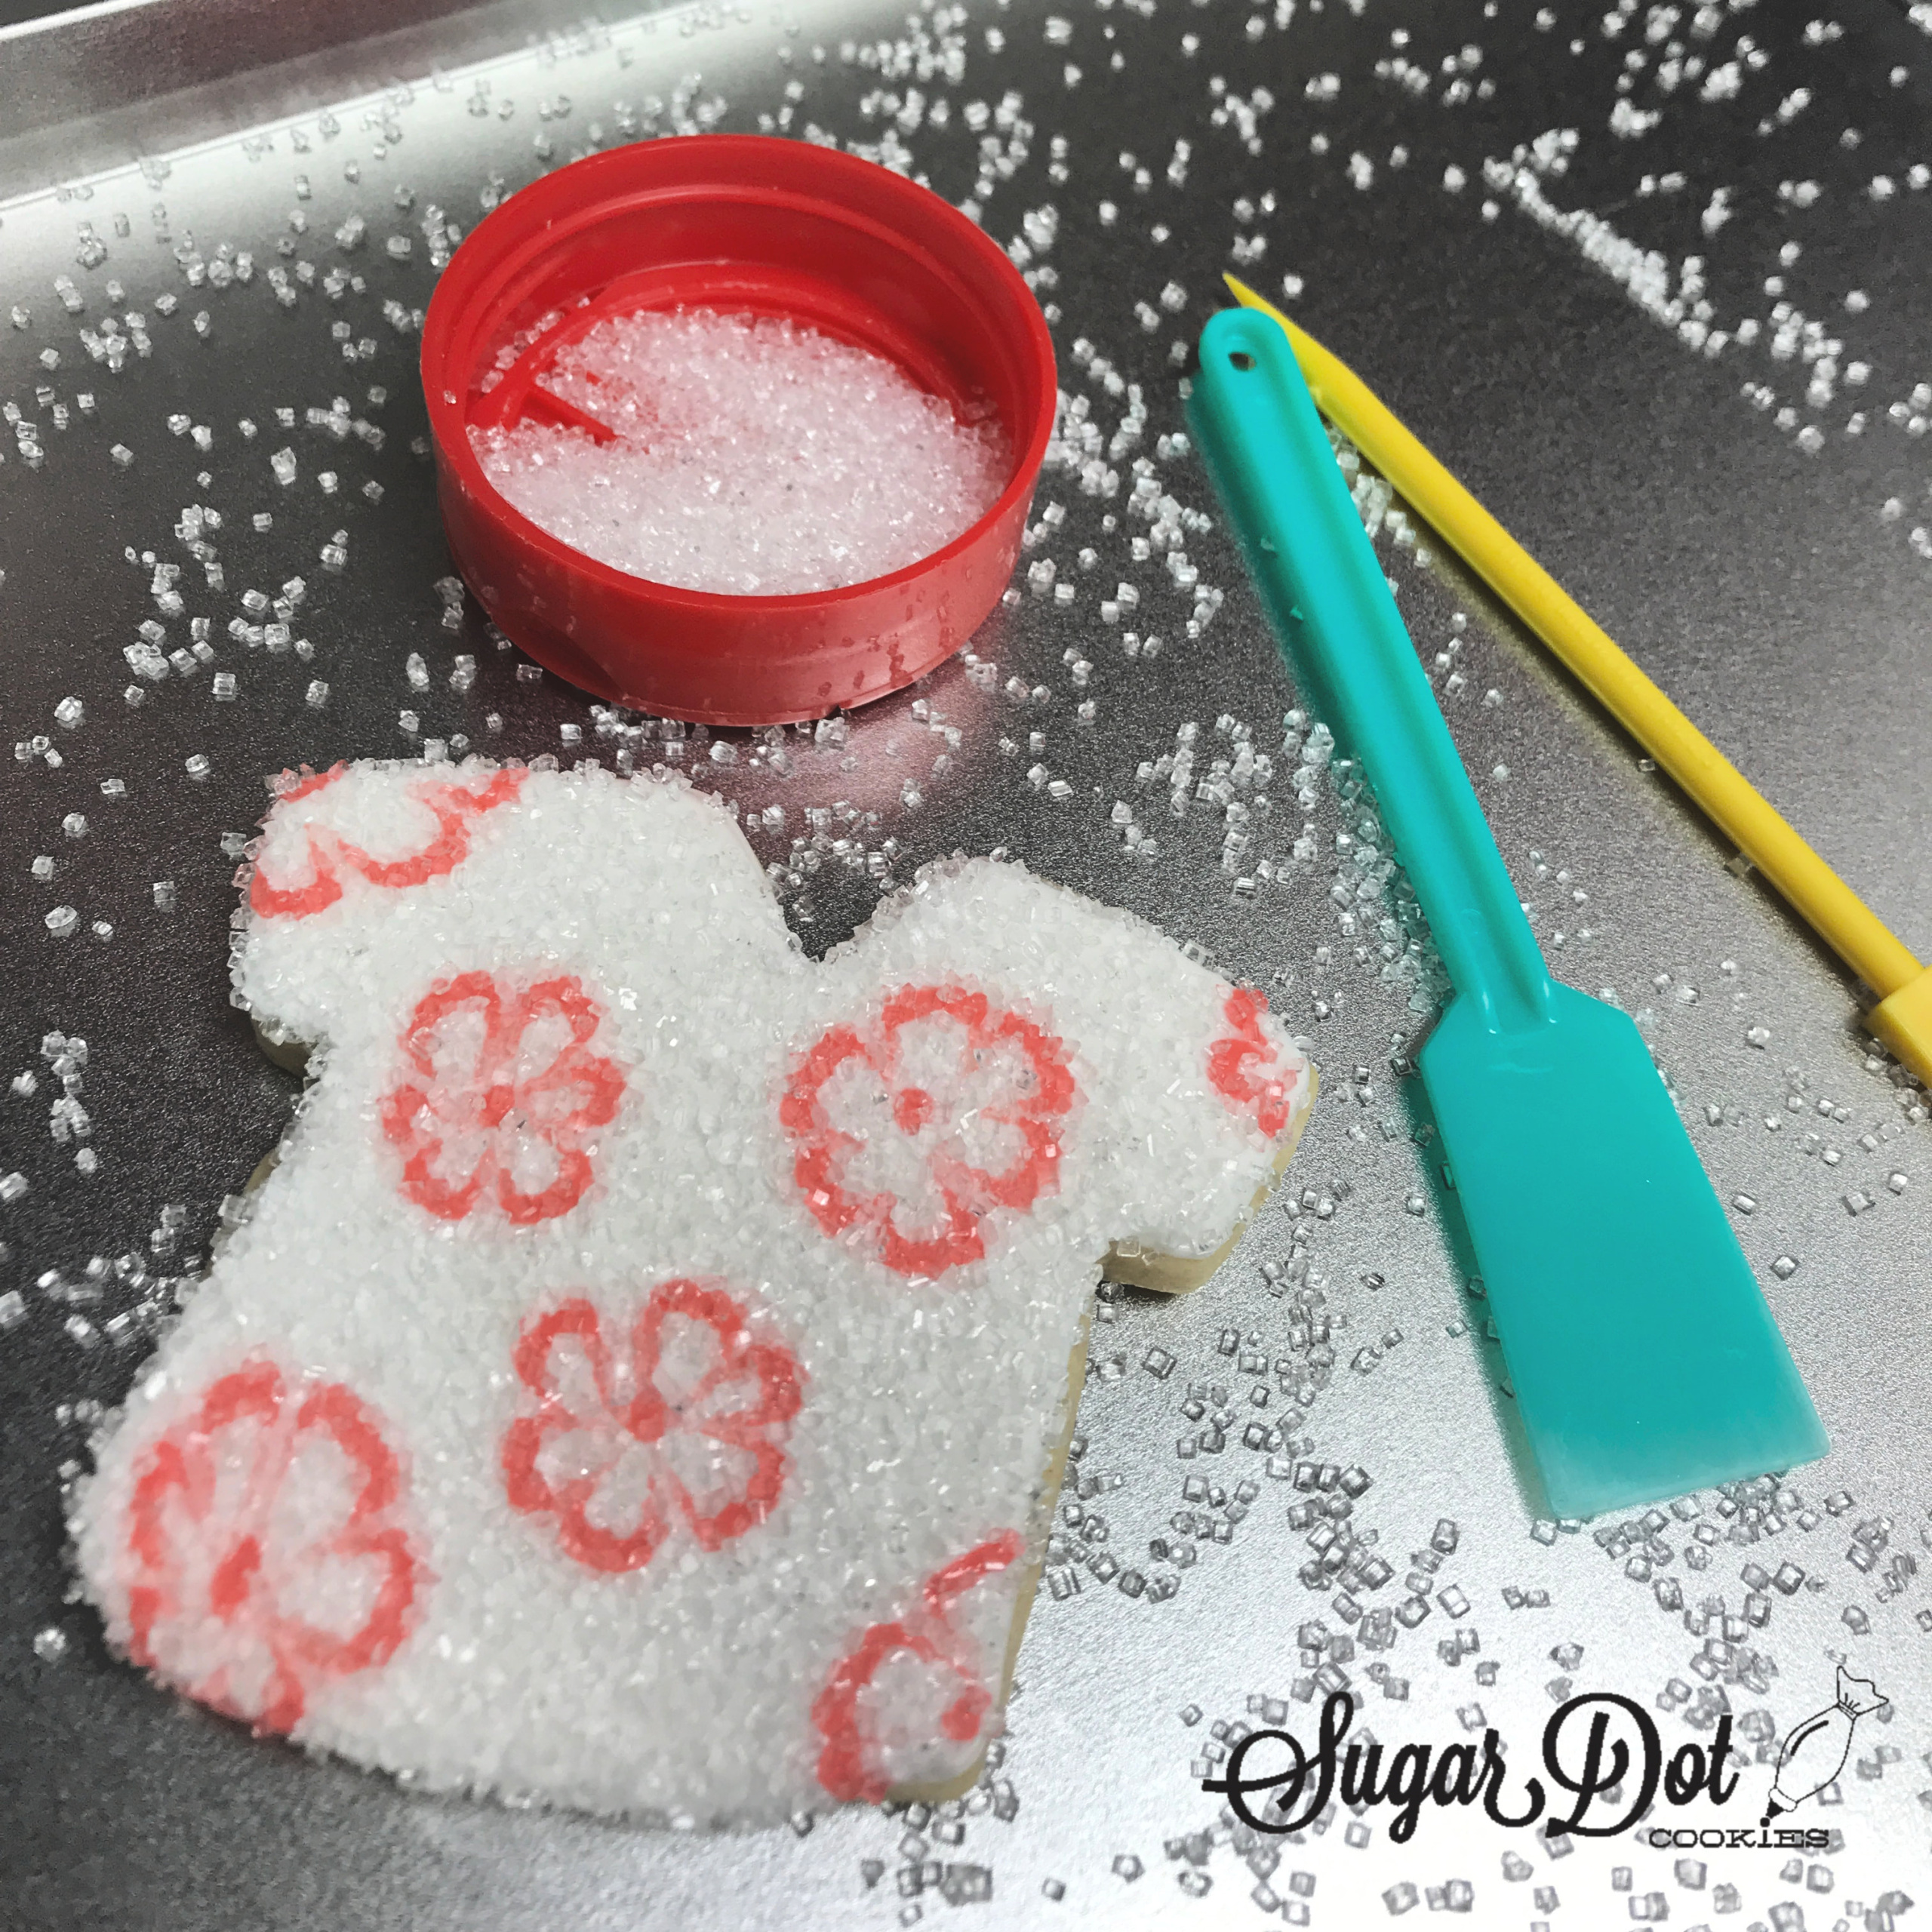 Decorating Cookie Cutter, Sugar Cookie Decorating Tools